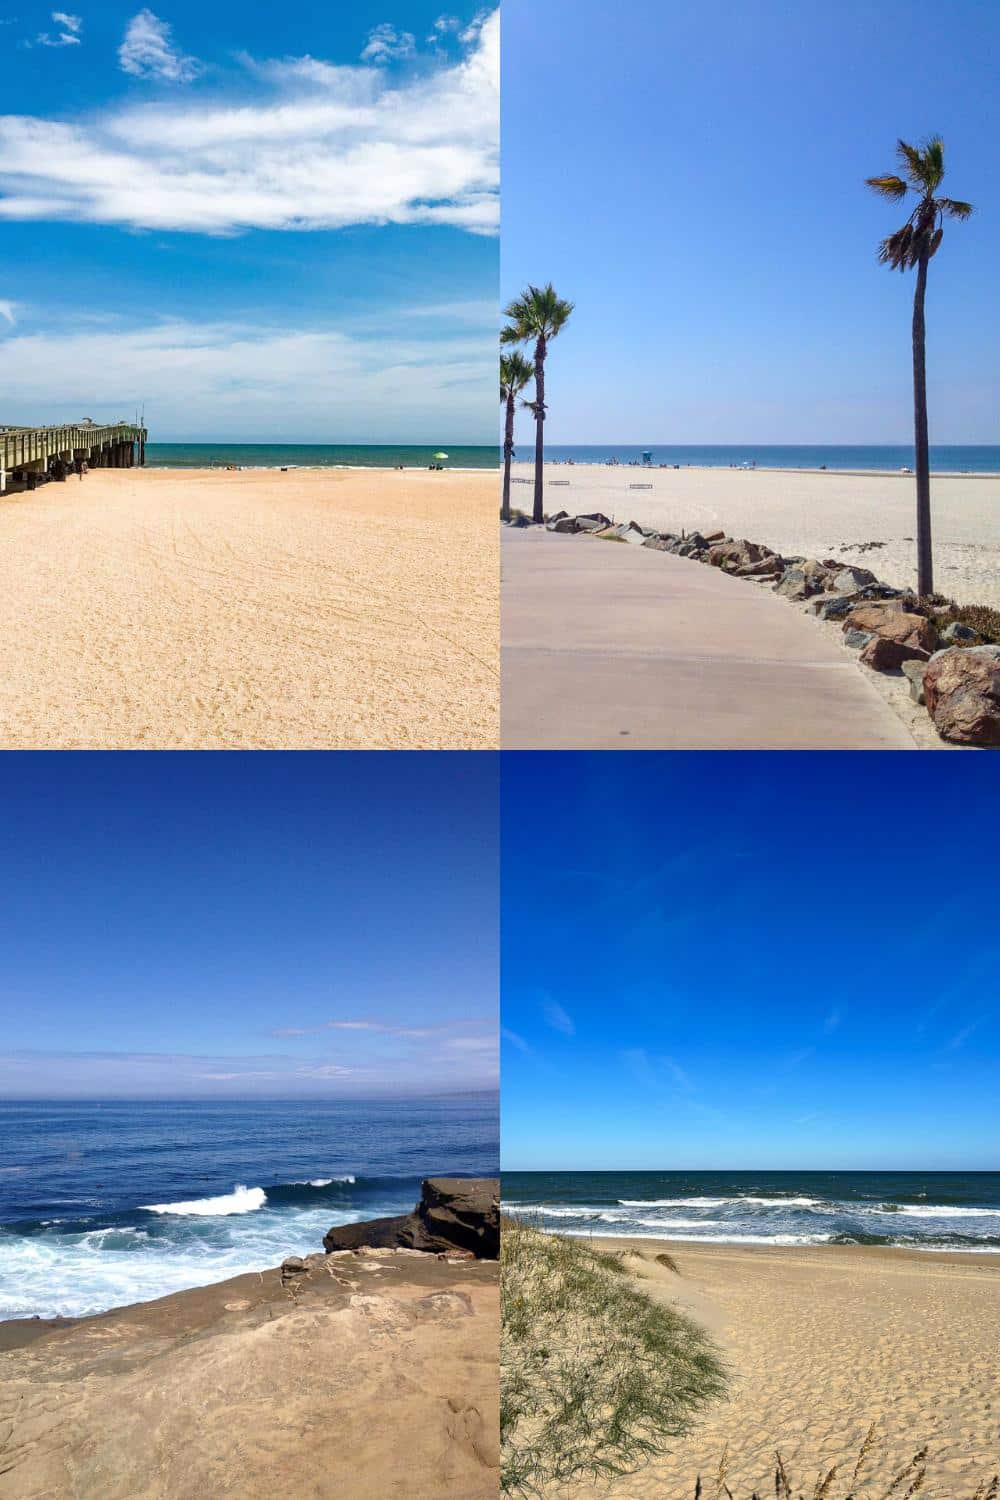 Beaches in the US: St. Augustine, Coronado, California, Outer Banks